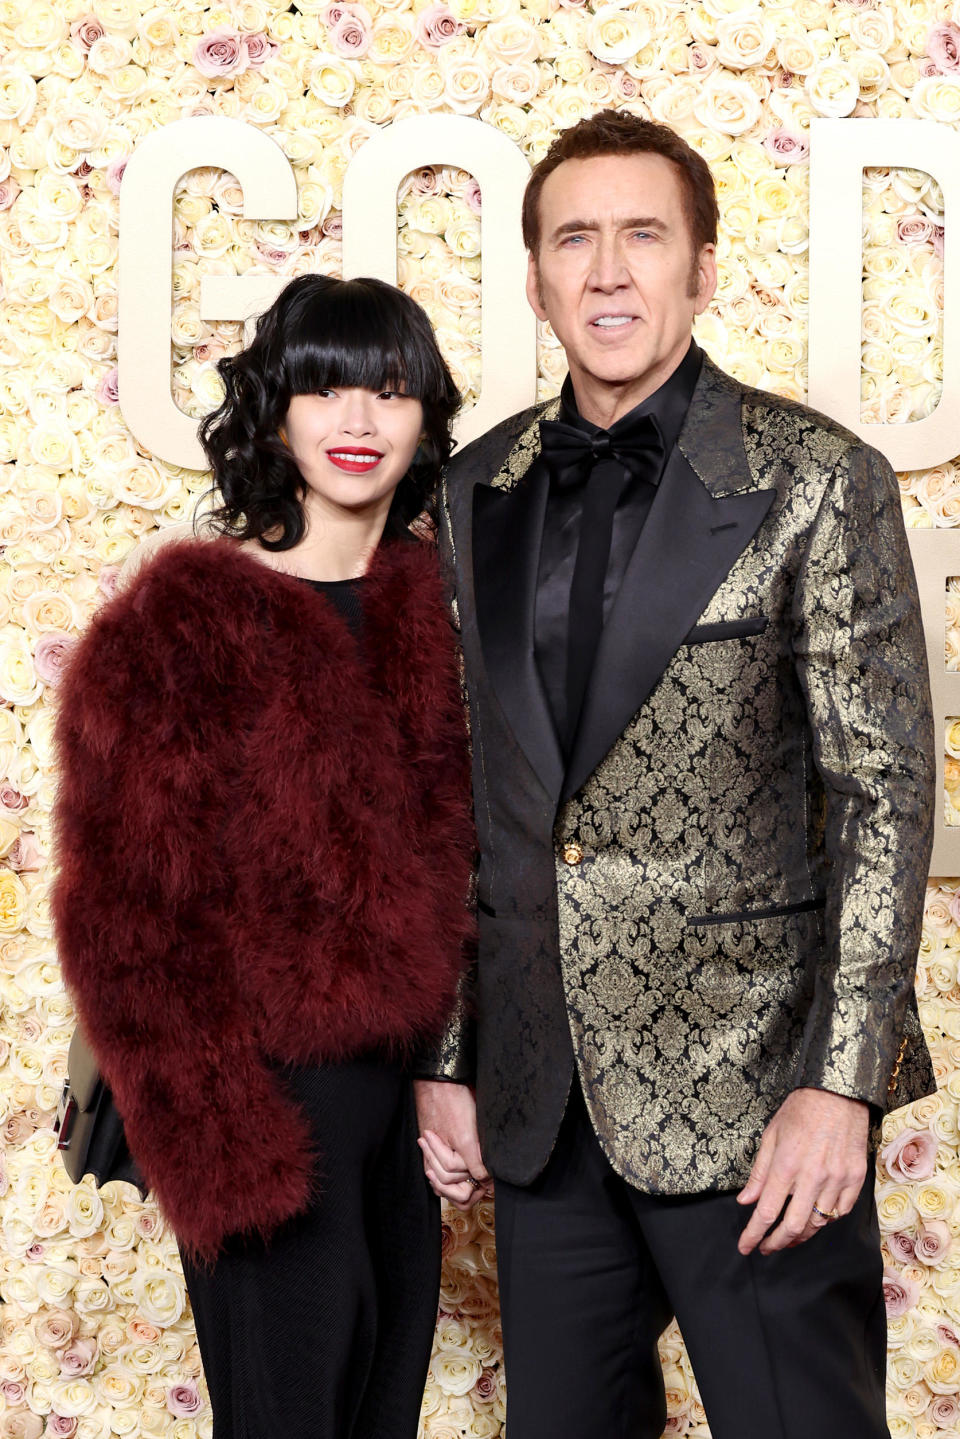 Riko Shibata and Nicolas Cage attend the 81st Annual Golden Globe Awards at The Beverly Hilton on January 7, 2024 — Cage's 60th birthday. / Credit: Monica Schipper/GA/The Hollywood Reporter via Getty Images